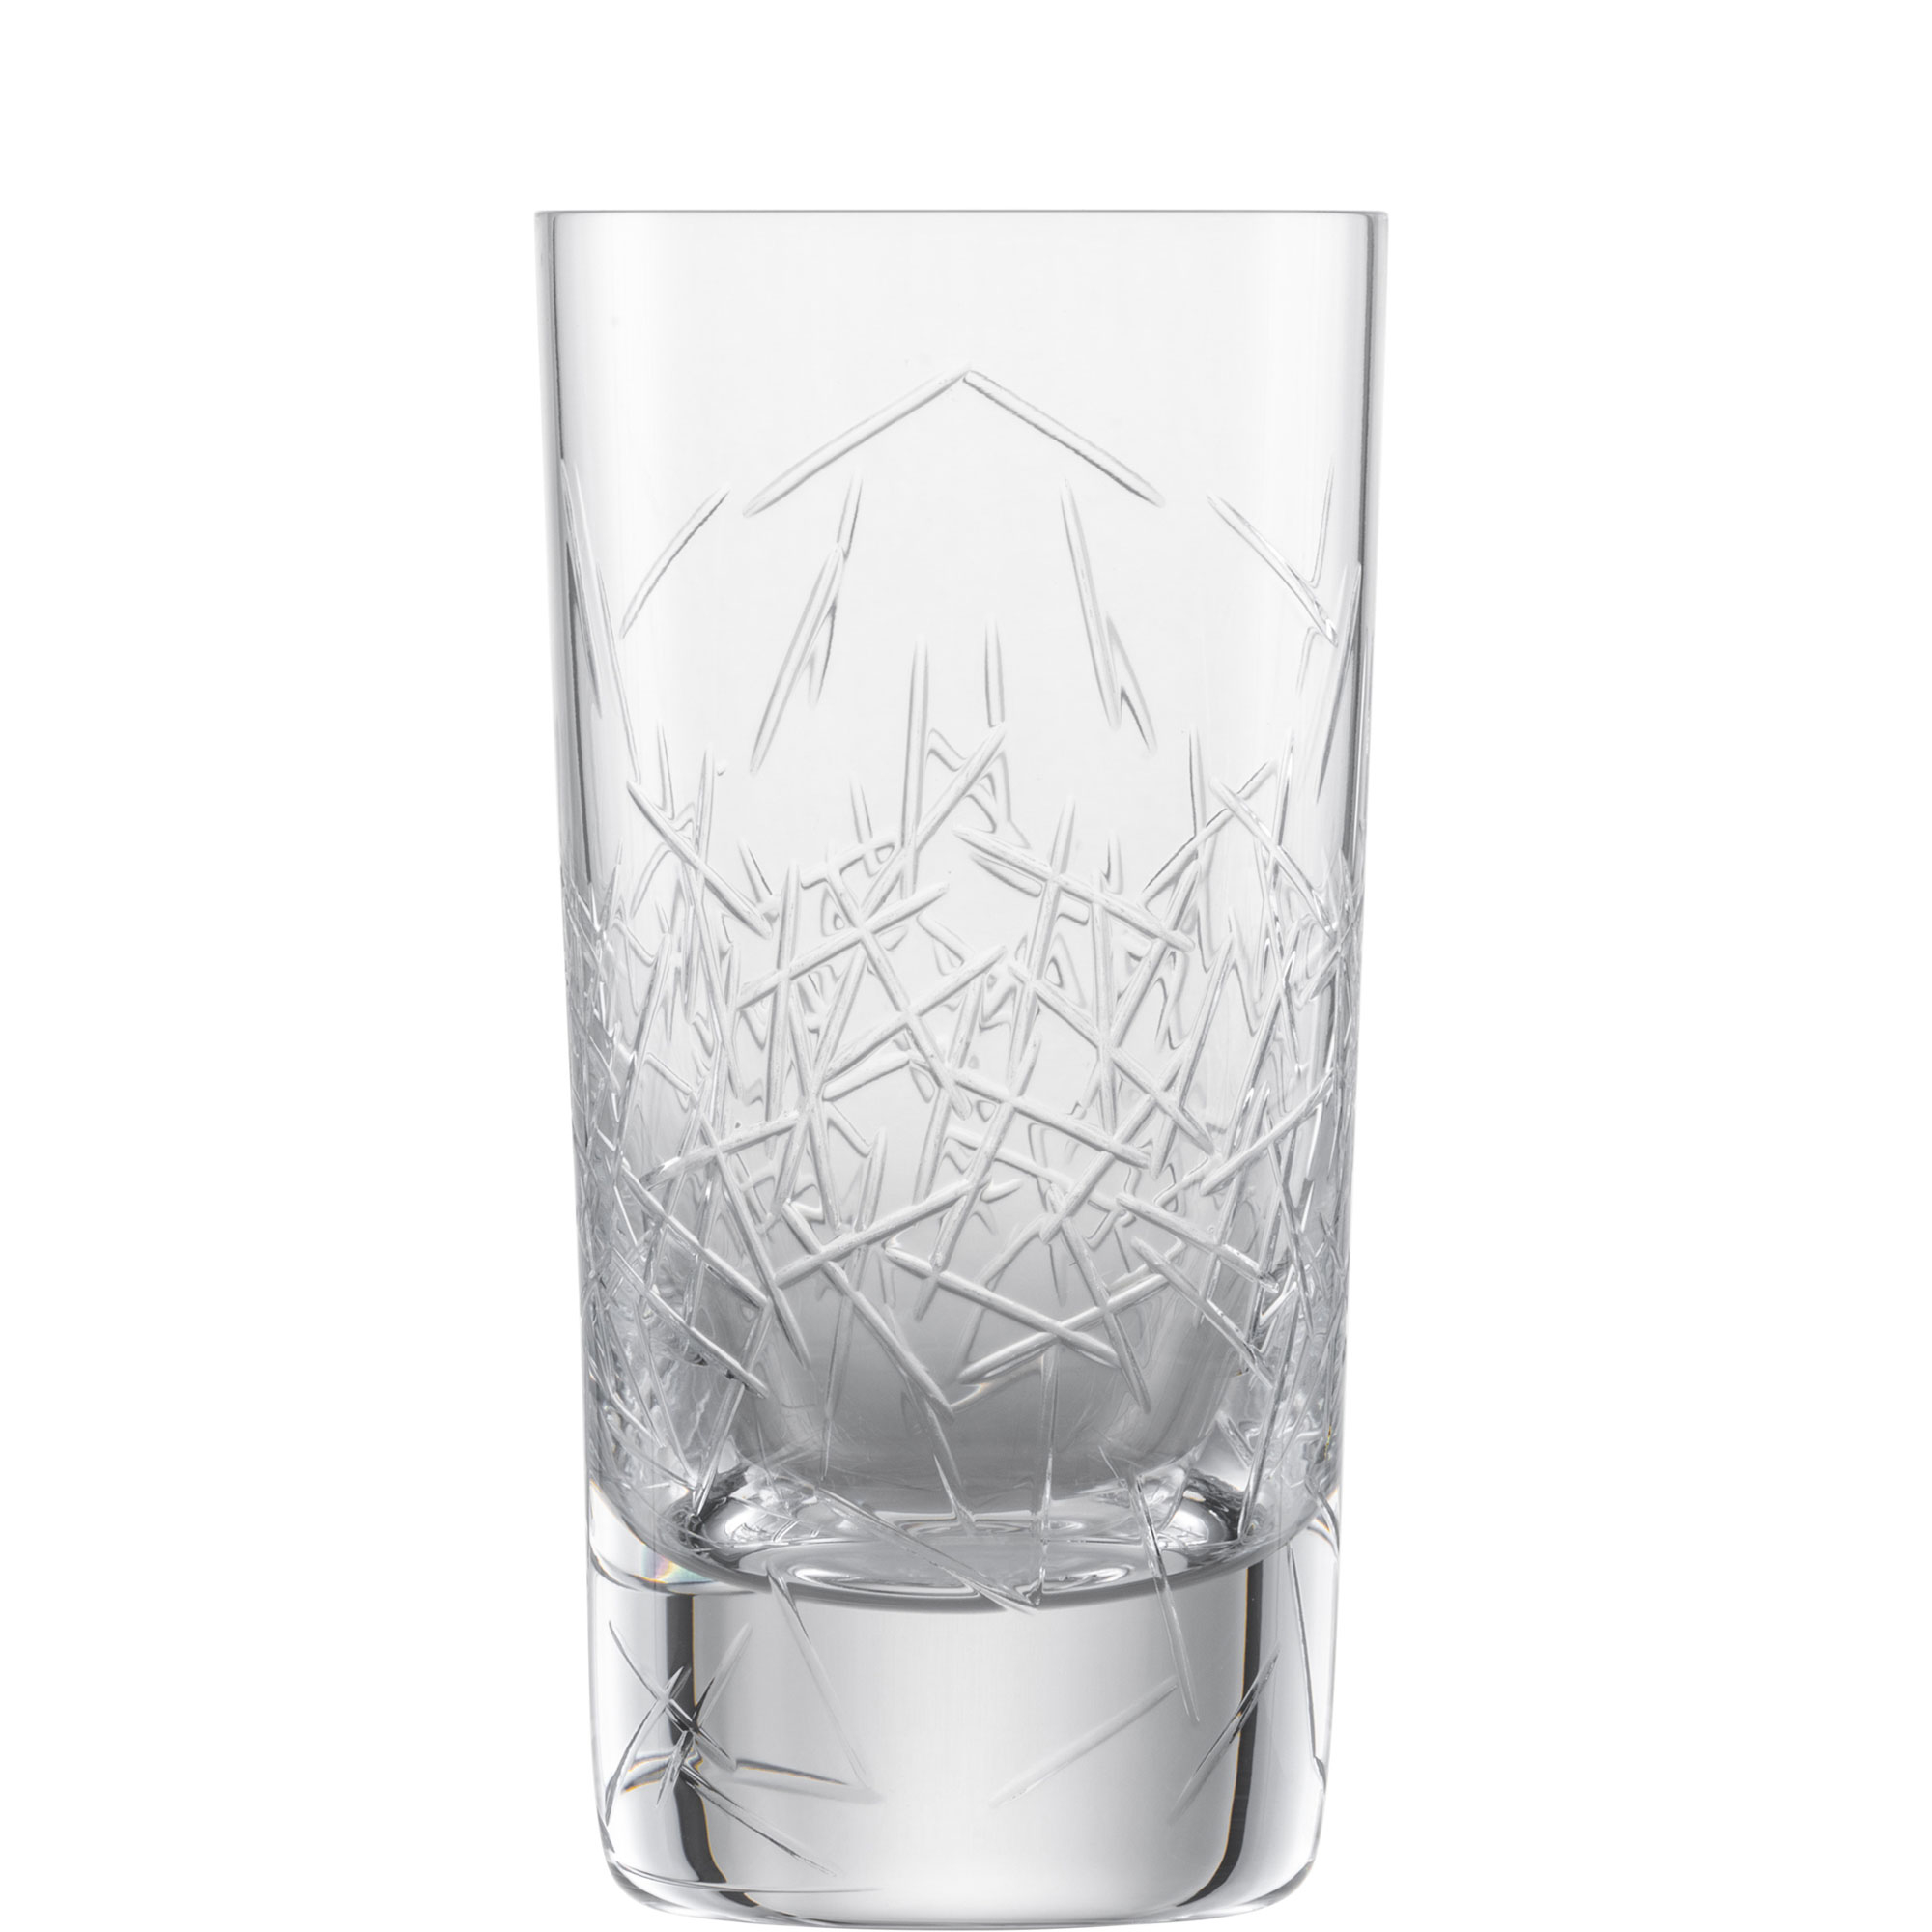 Long drink glass Hommage Glace, Zwiesel Glas - 353ml (6 pcs.)